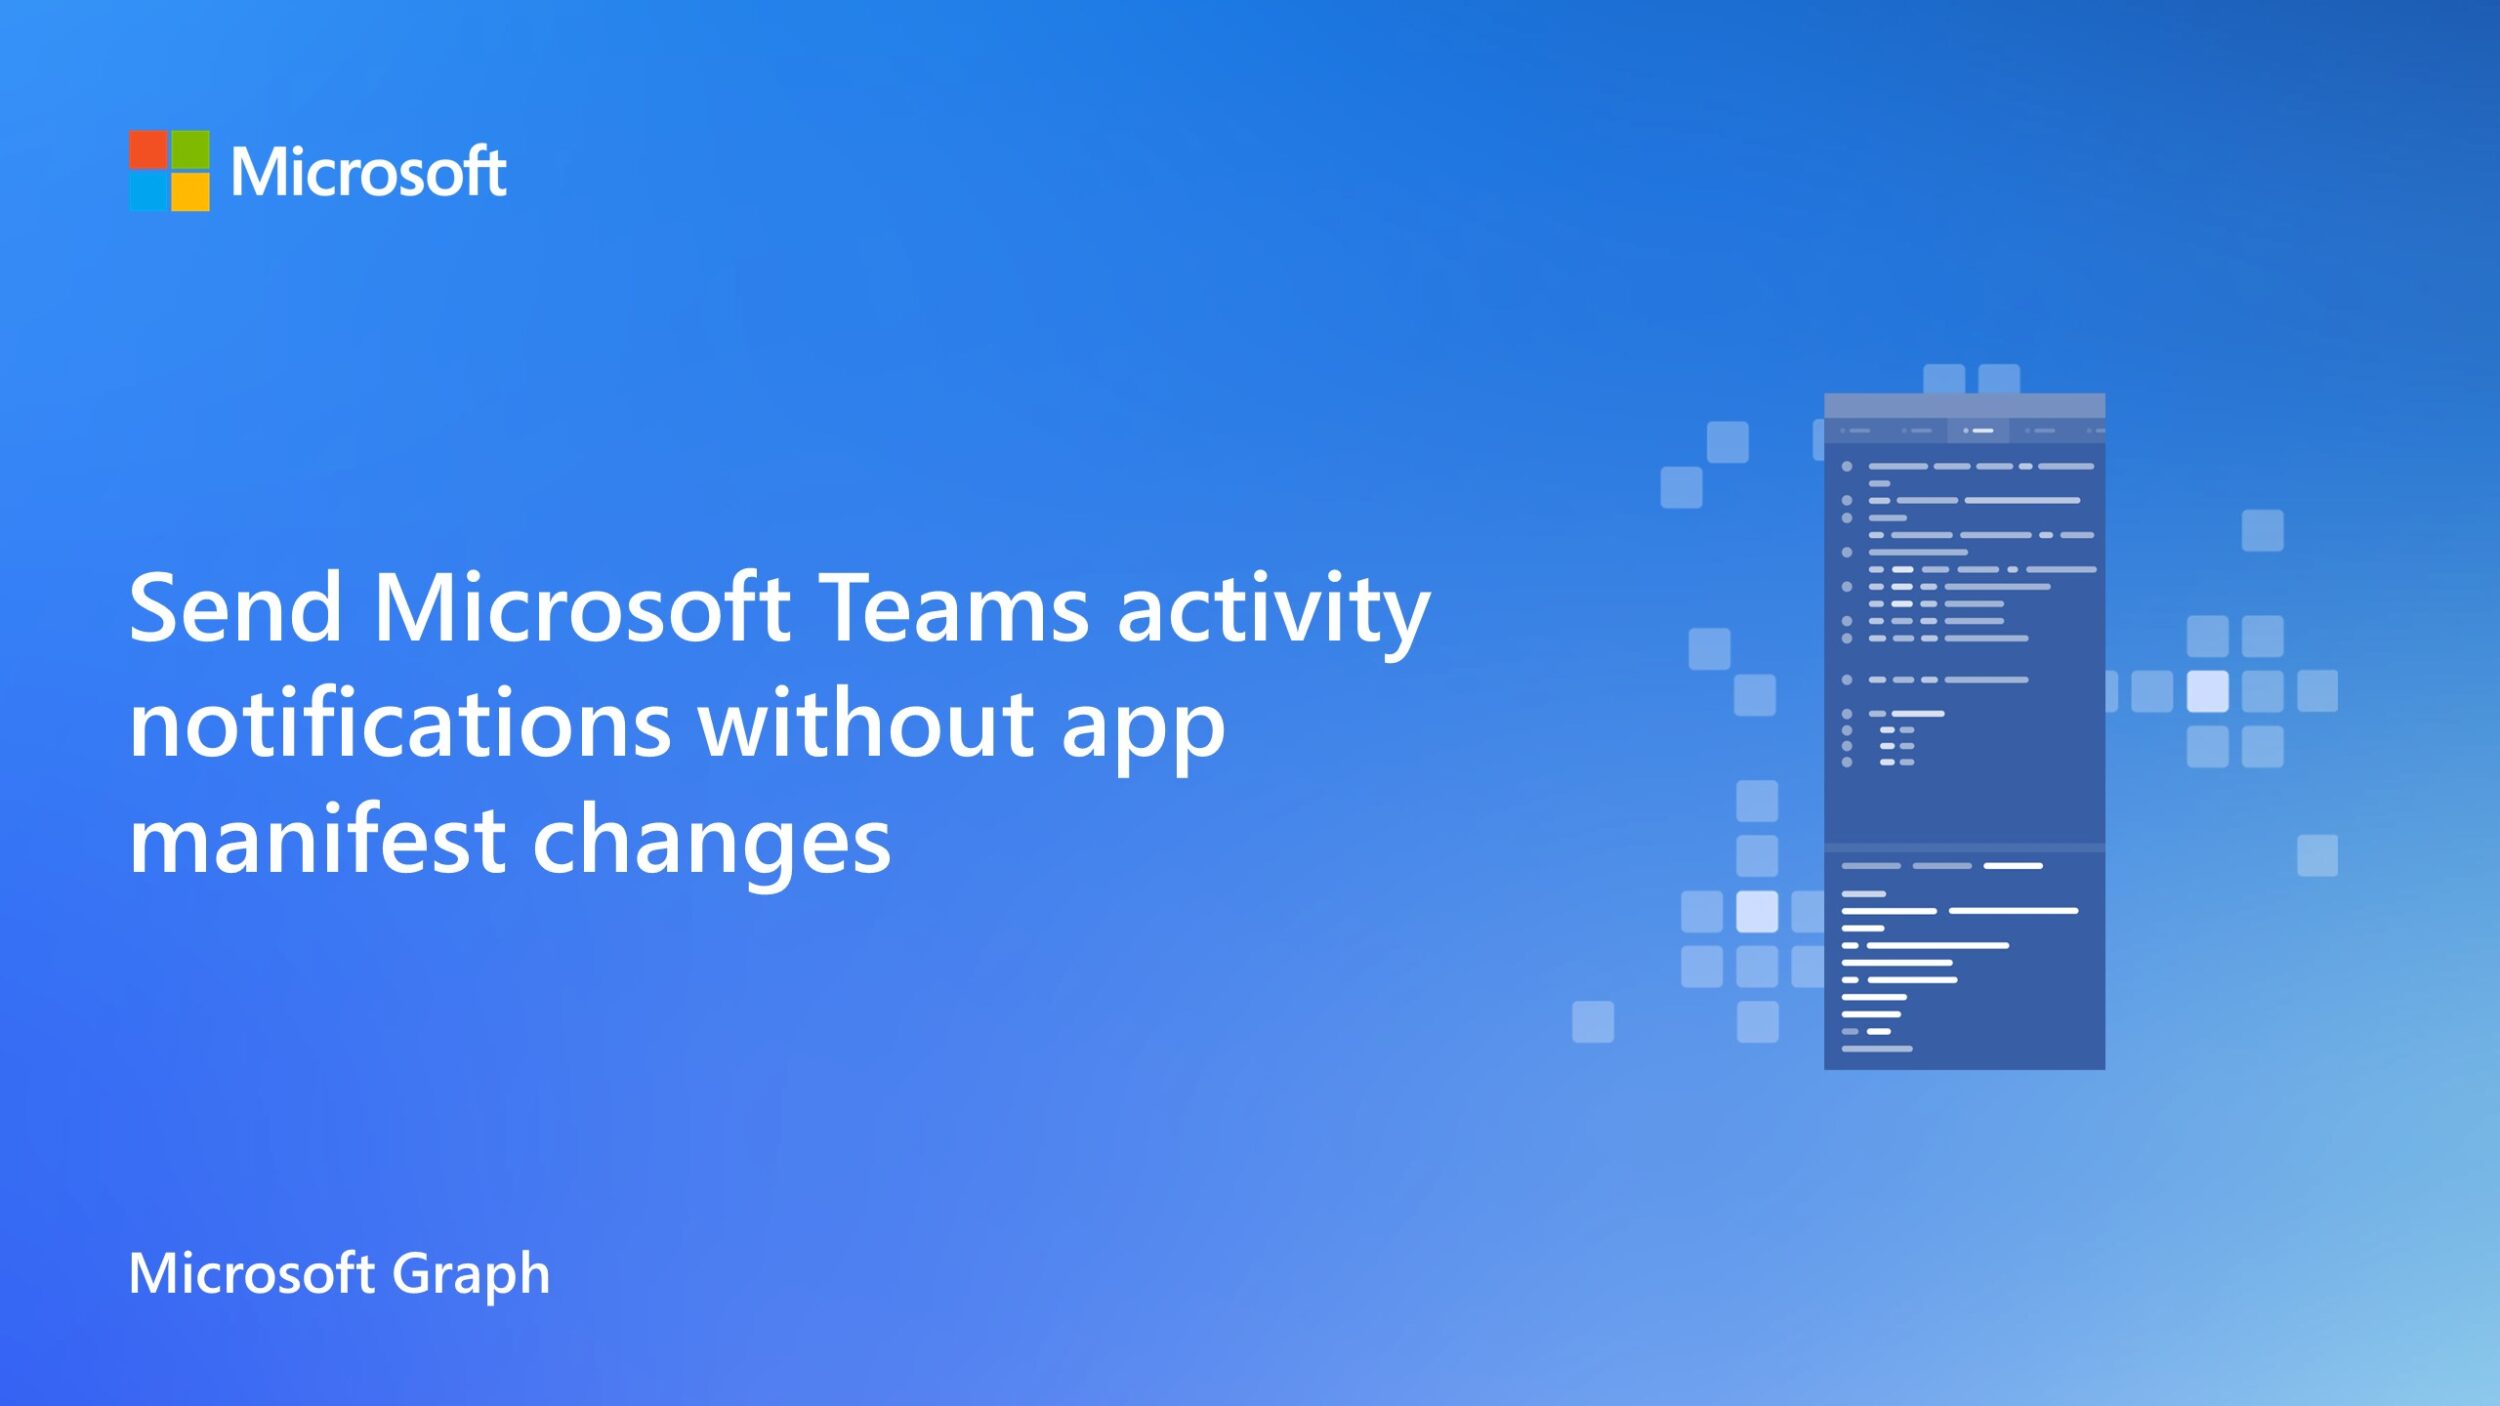 Send Microsoft Teams activity notifications without app manifest changes